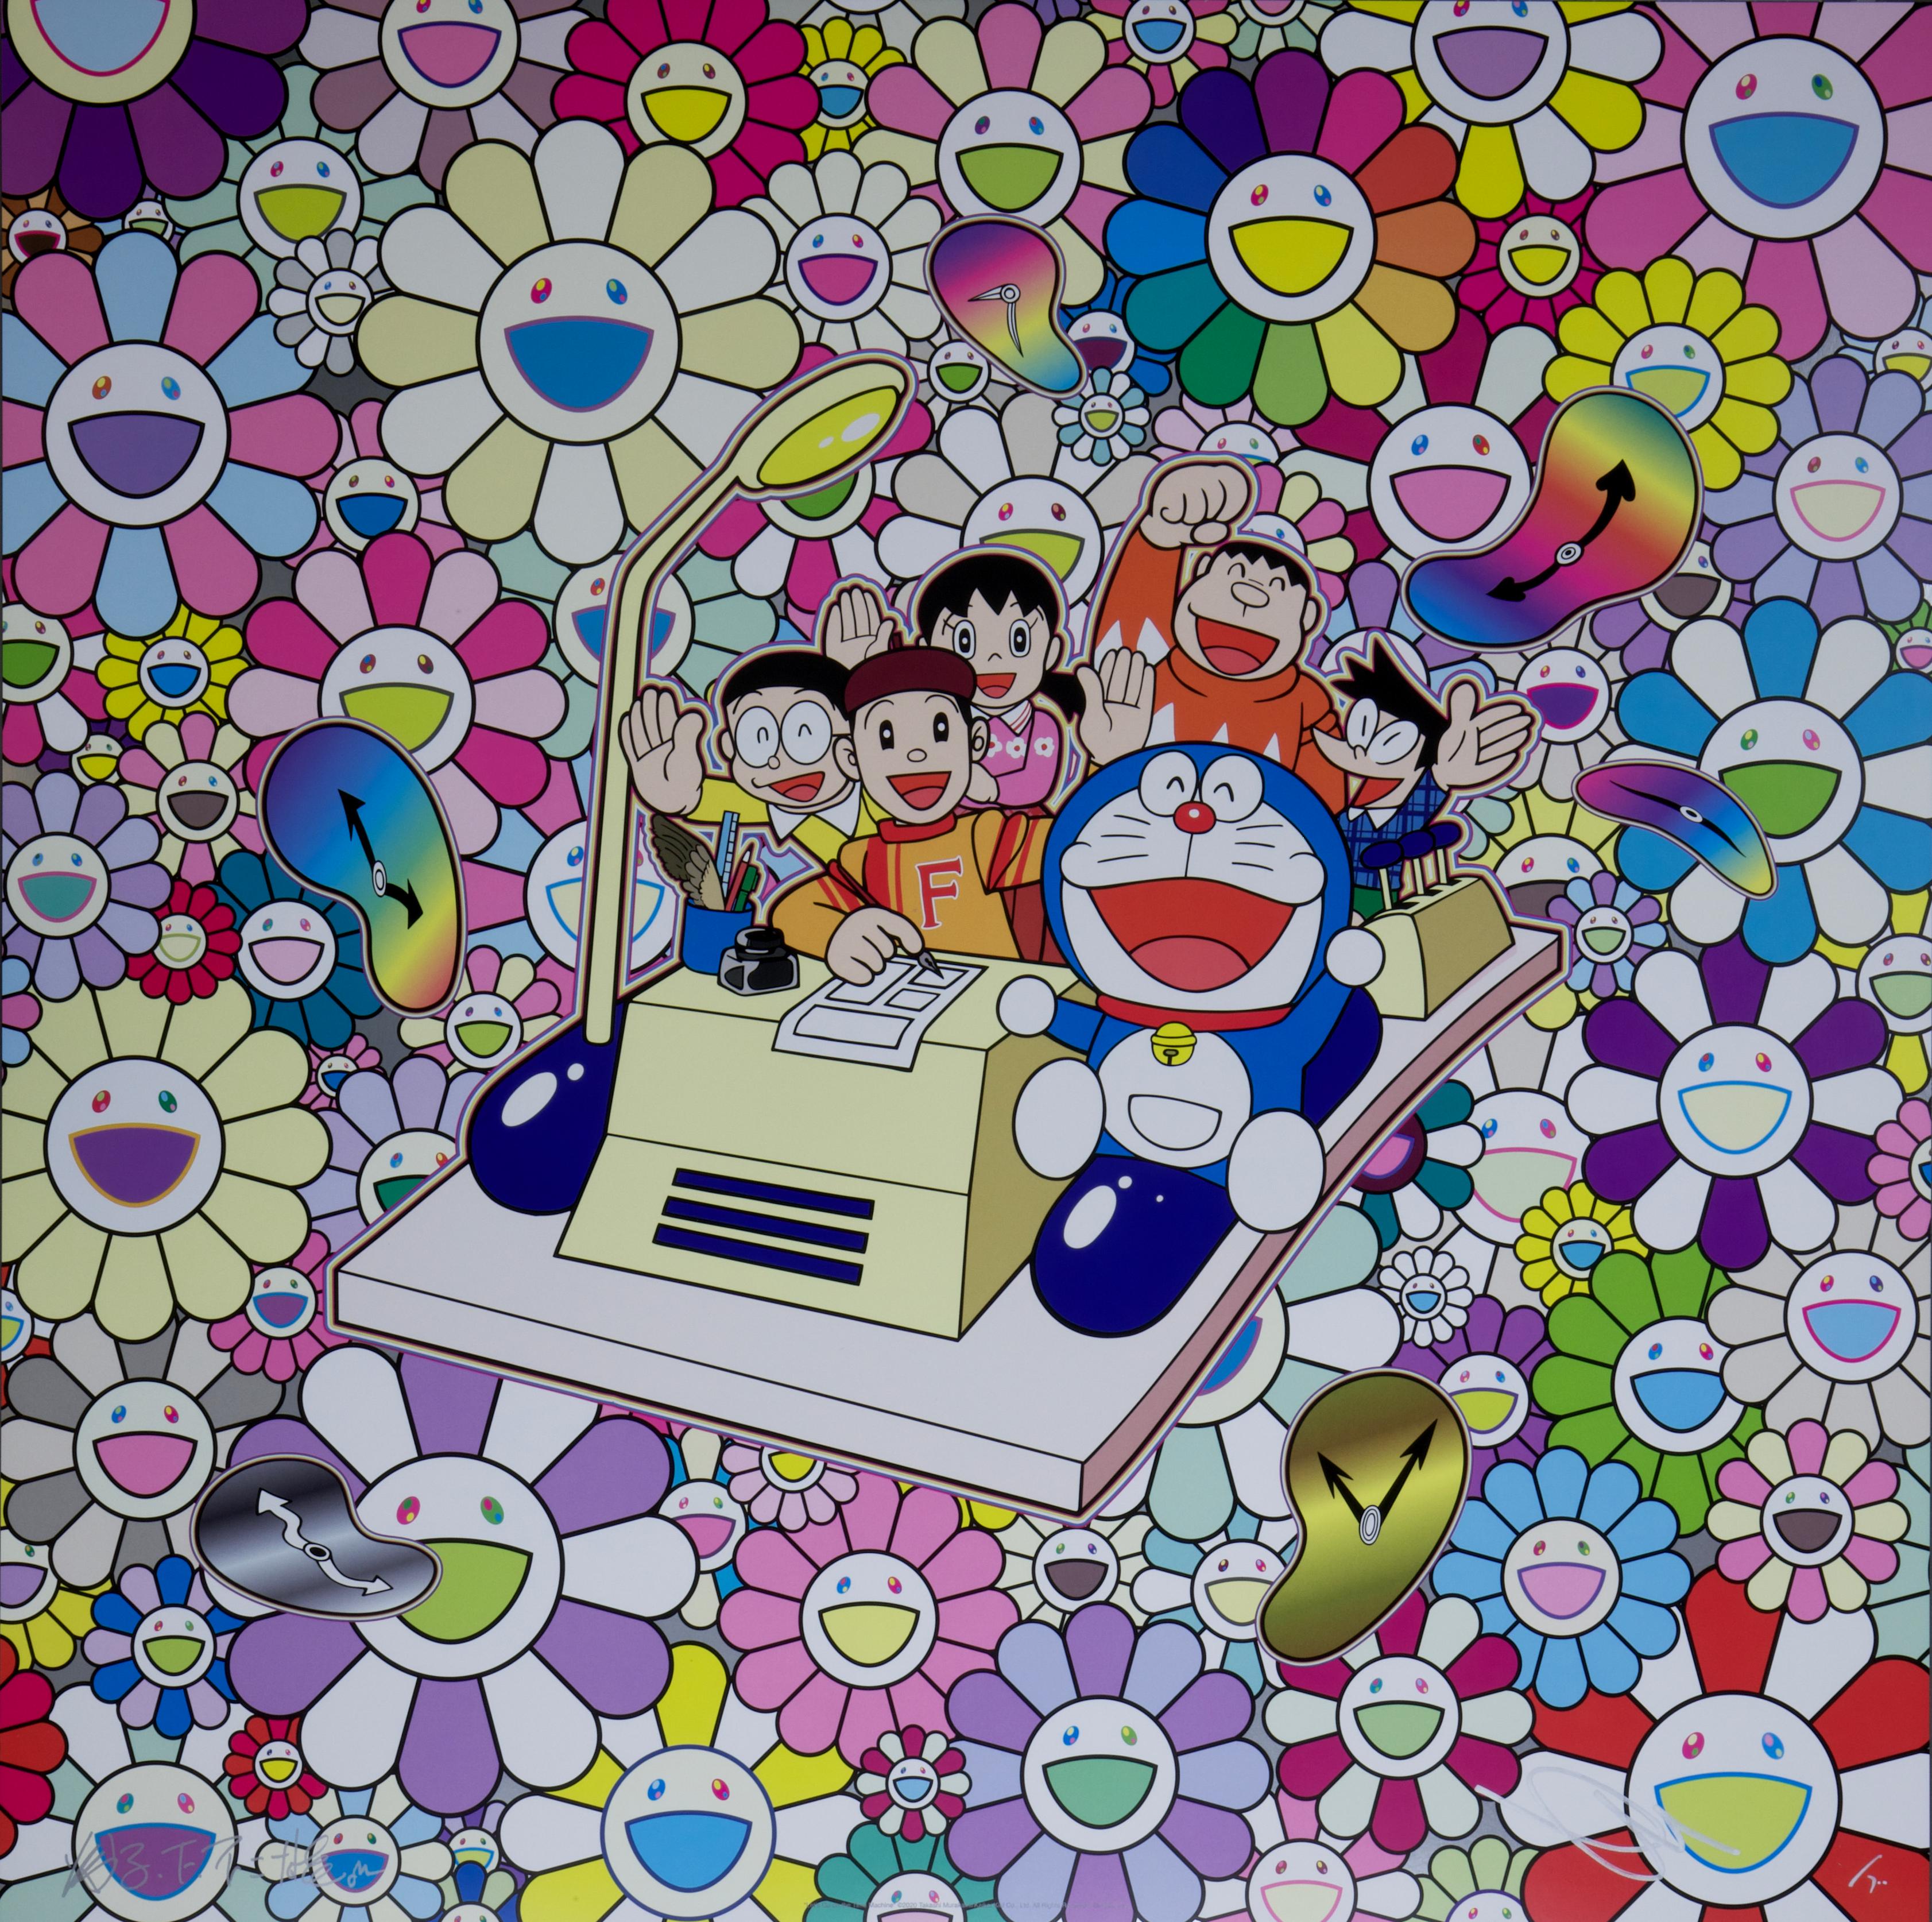 Let's Go on the Time Machine - Print by Takashi Murakami